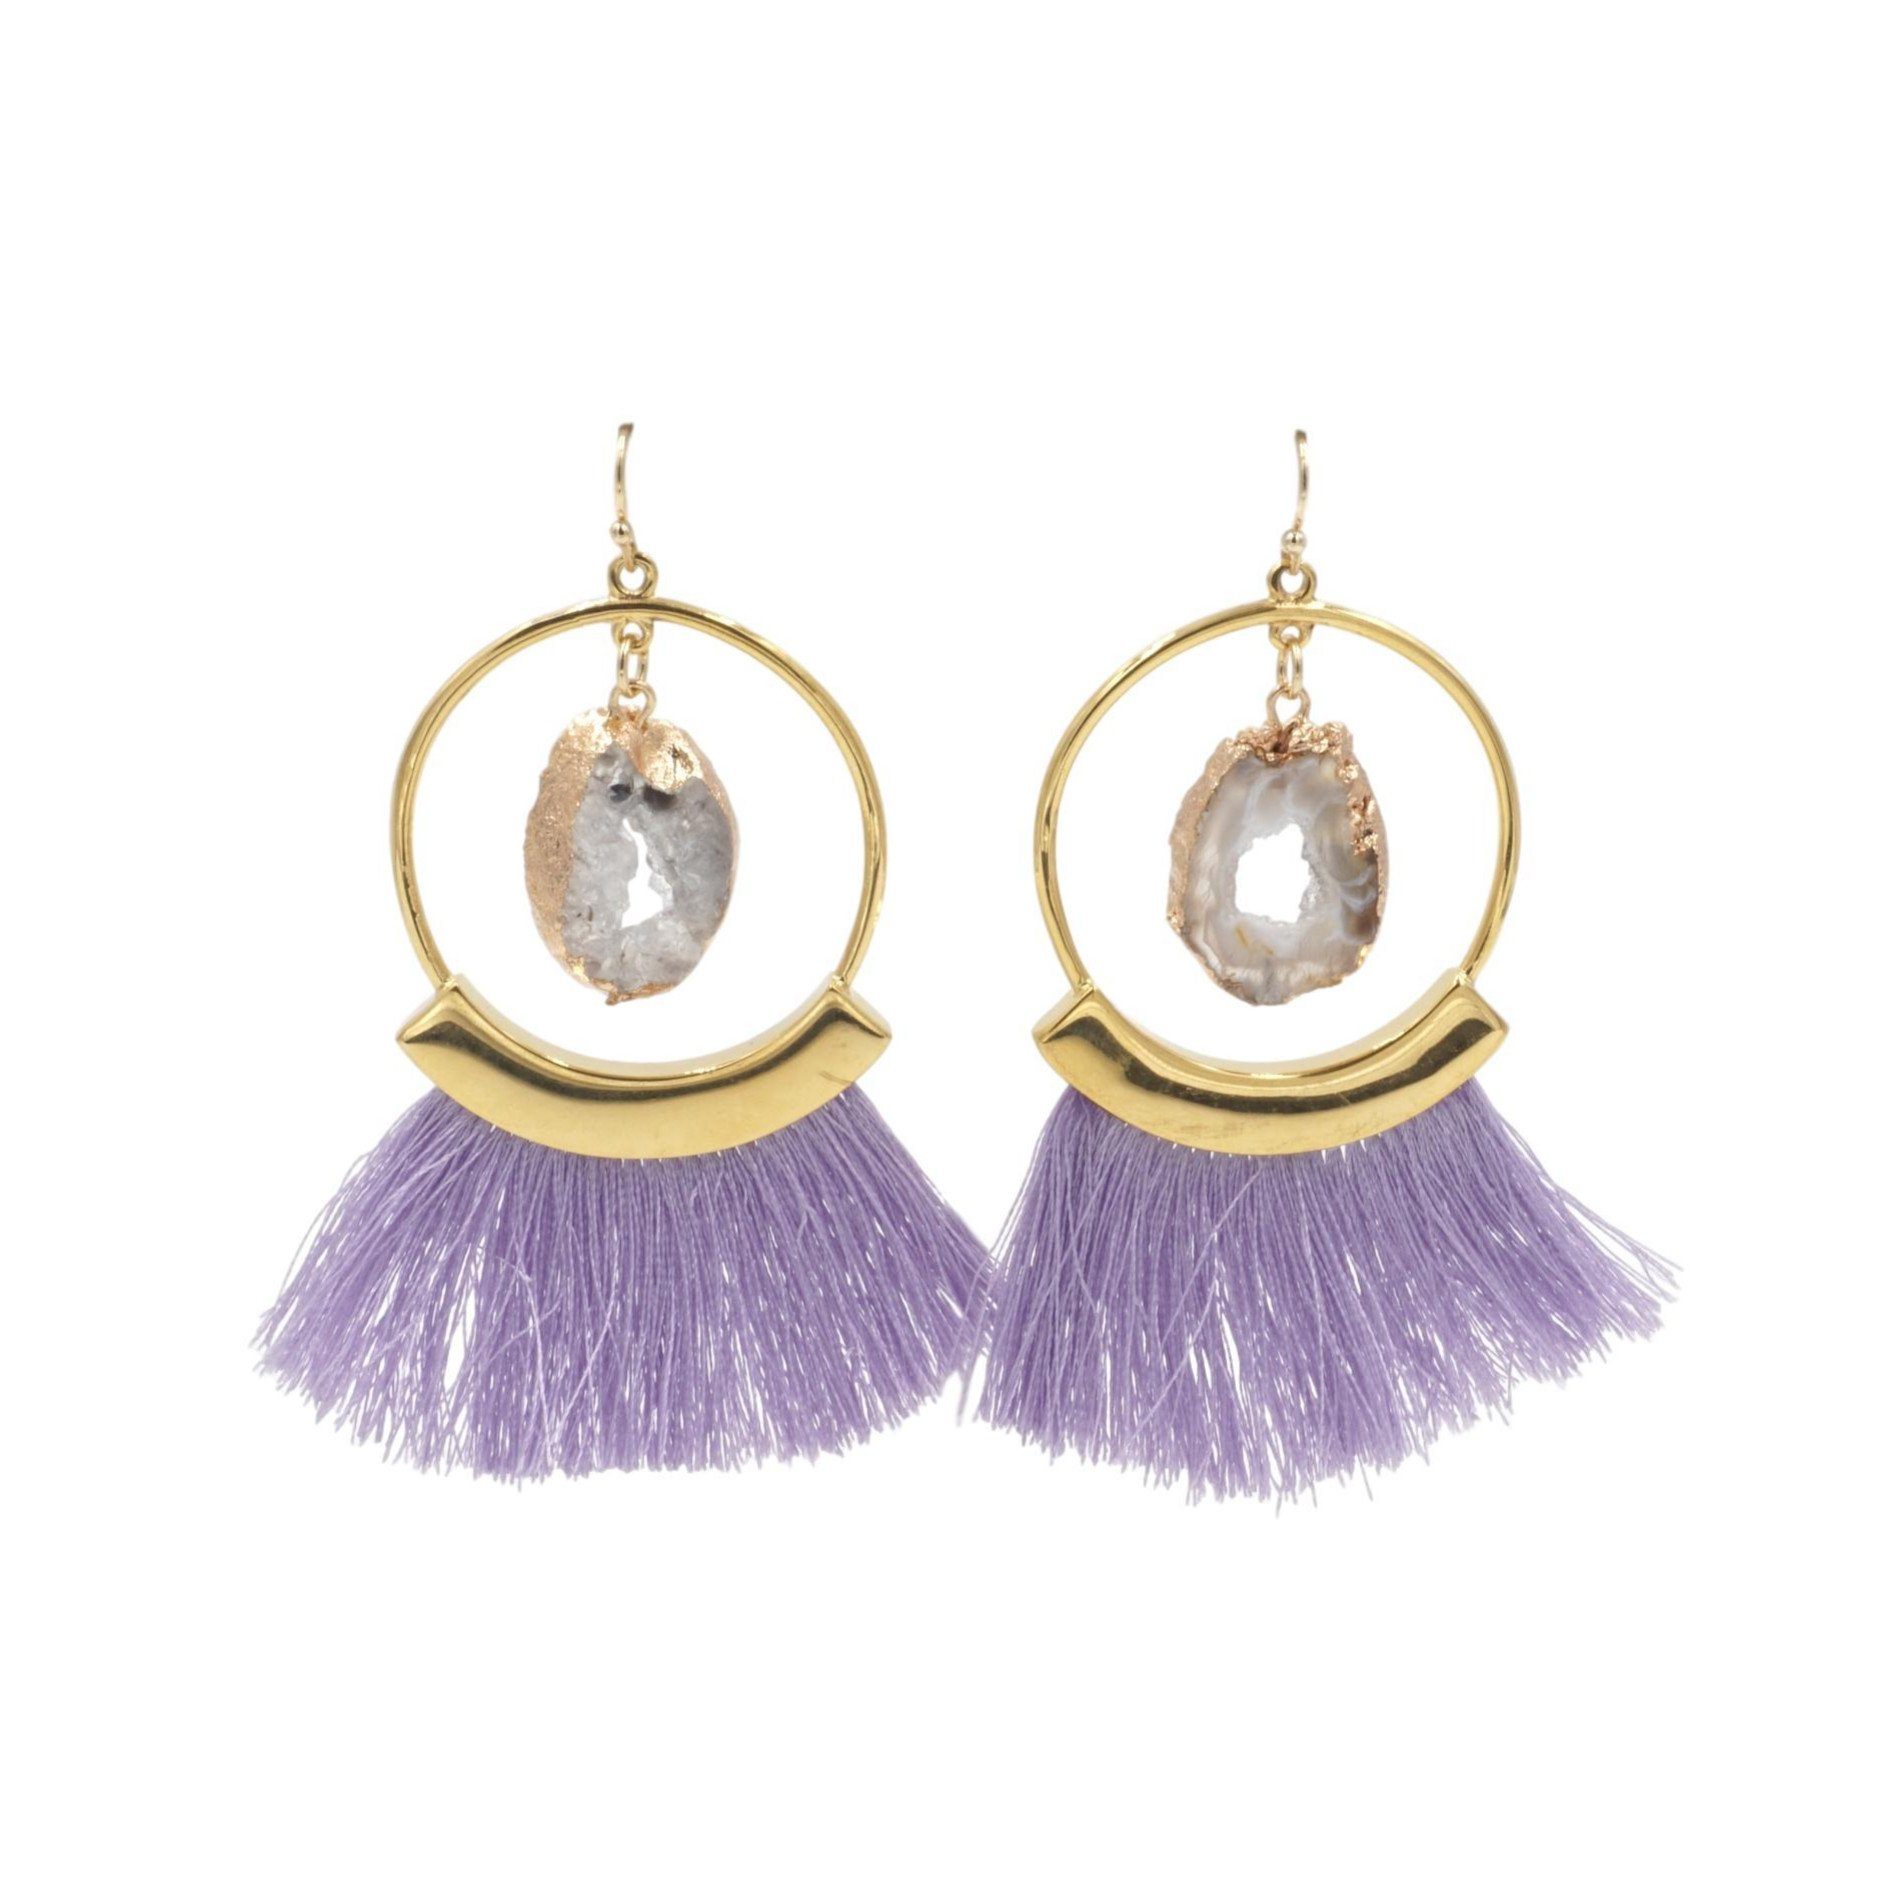 Agate Collection - Royal Fringe Earrings fine designer jewelry for men and women